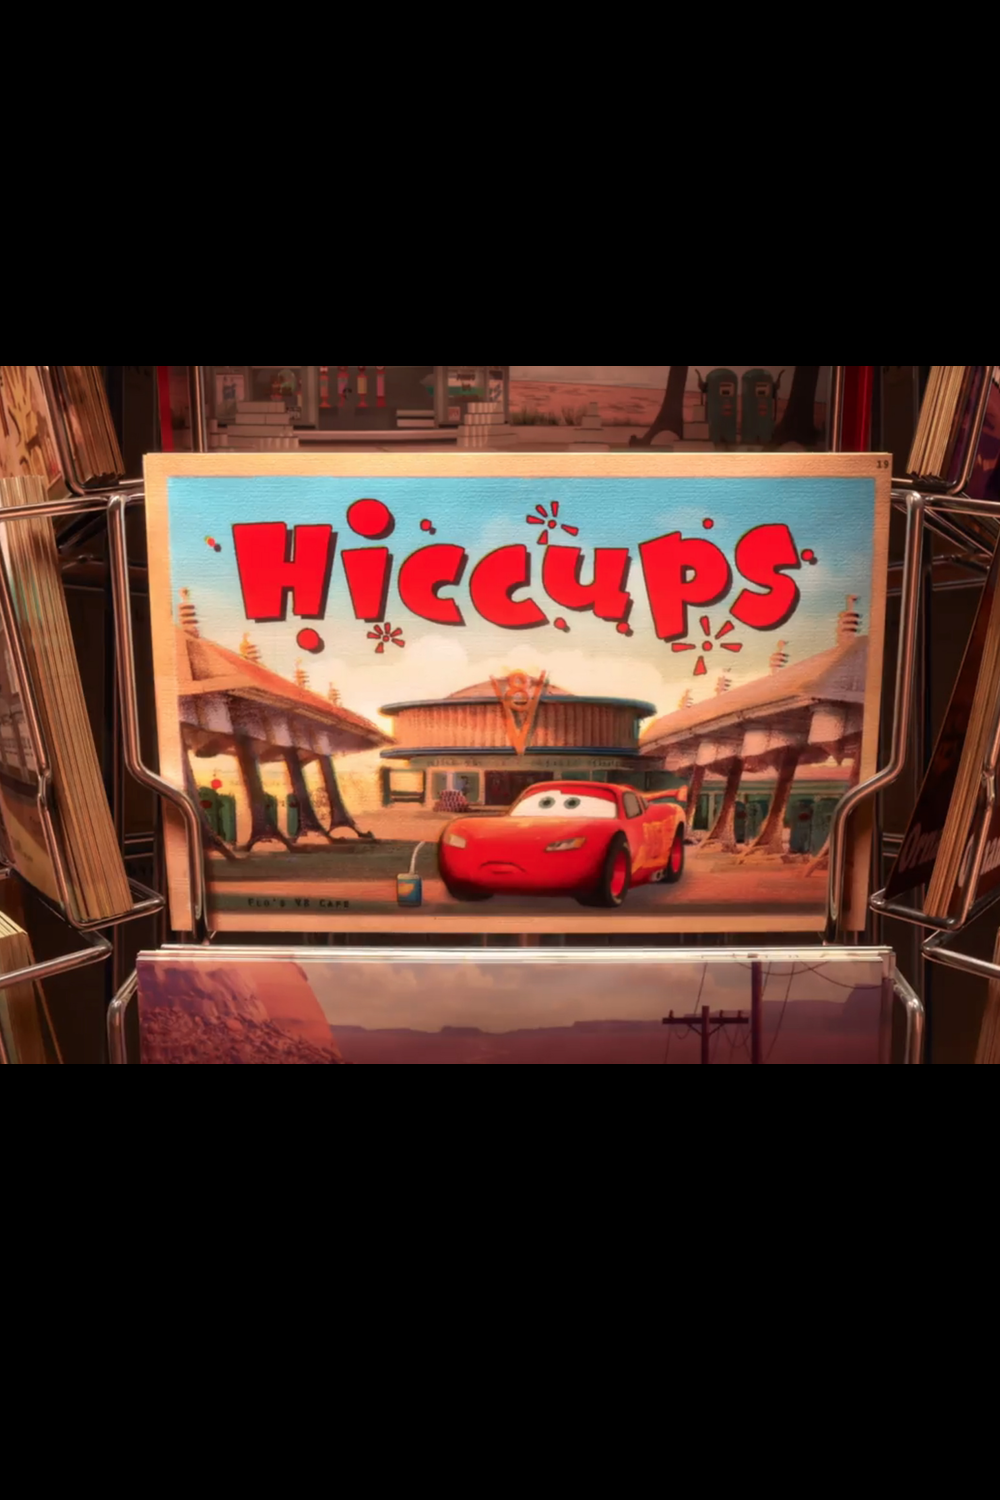 hiccups poster.png